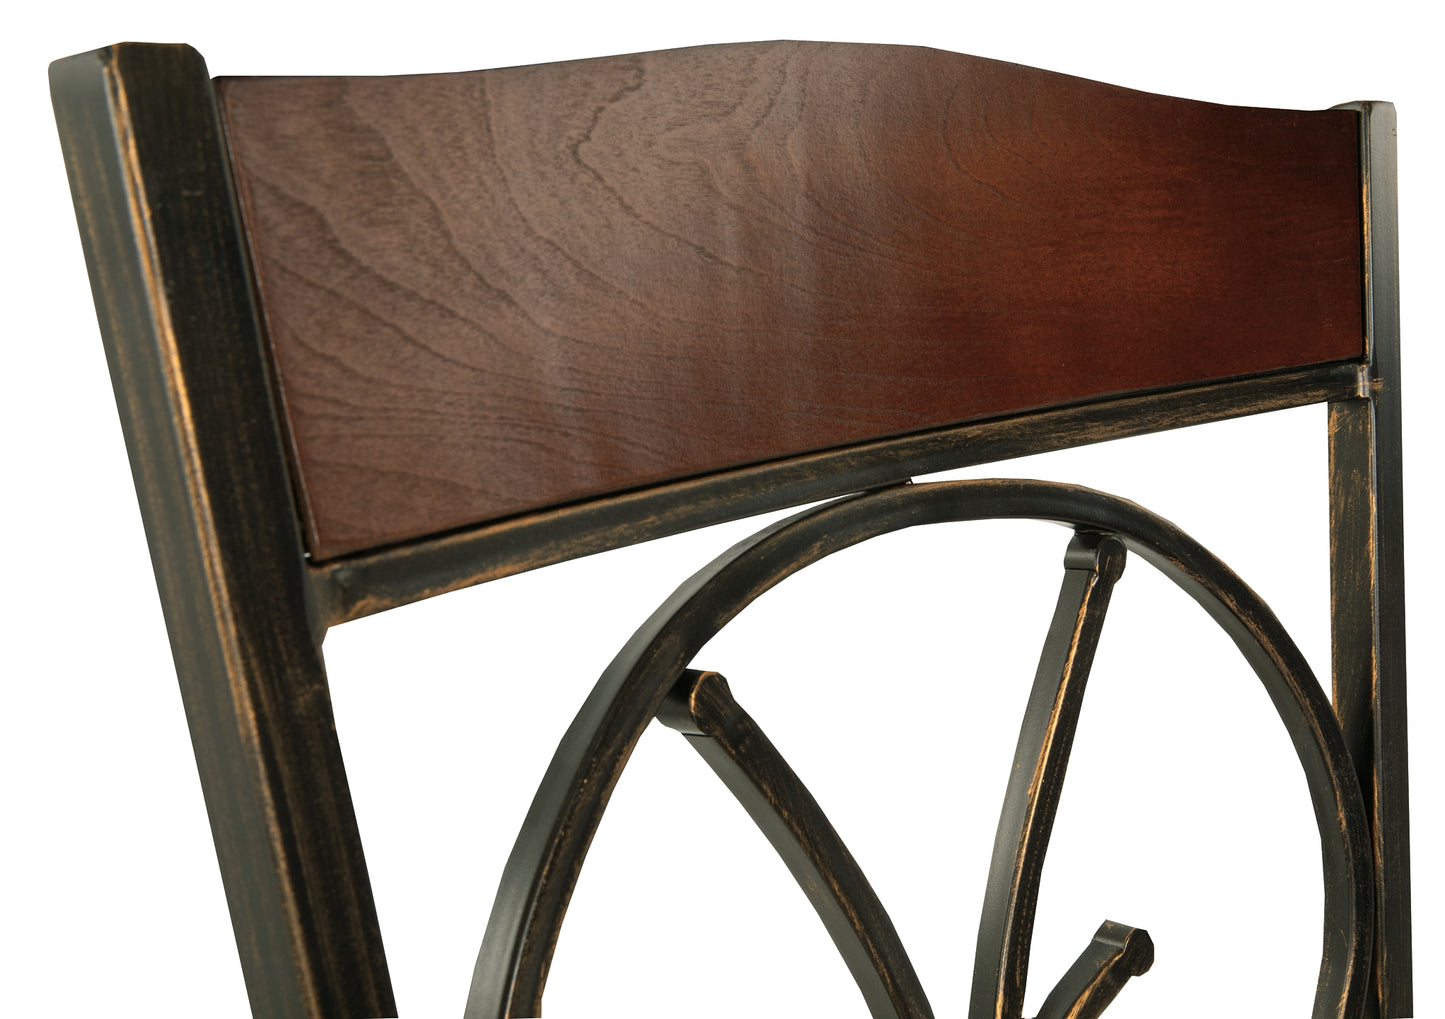 Glambrey Dining Table and 4 Chairs Milwaukee Furniture of Chicago - Furniture Store in Chicago Serving Humbolt Park, Roscoe Village, Avondale, & Homan Square